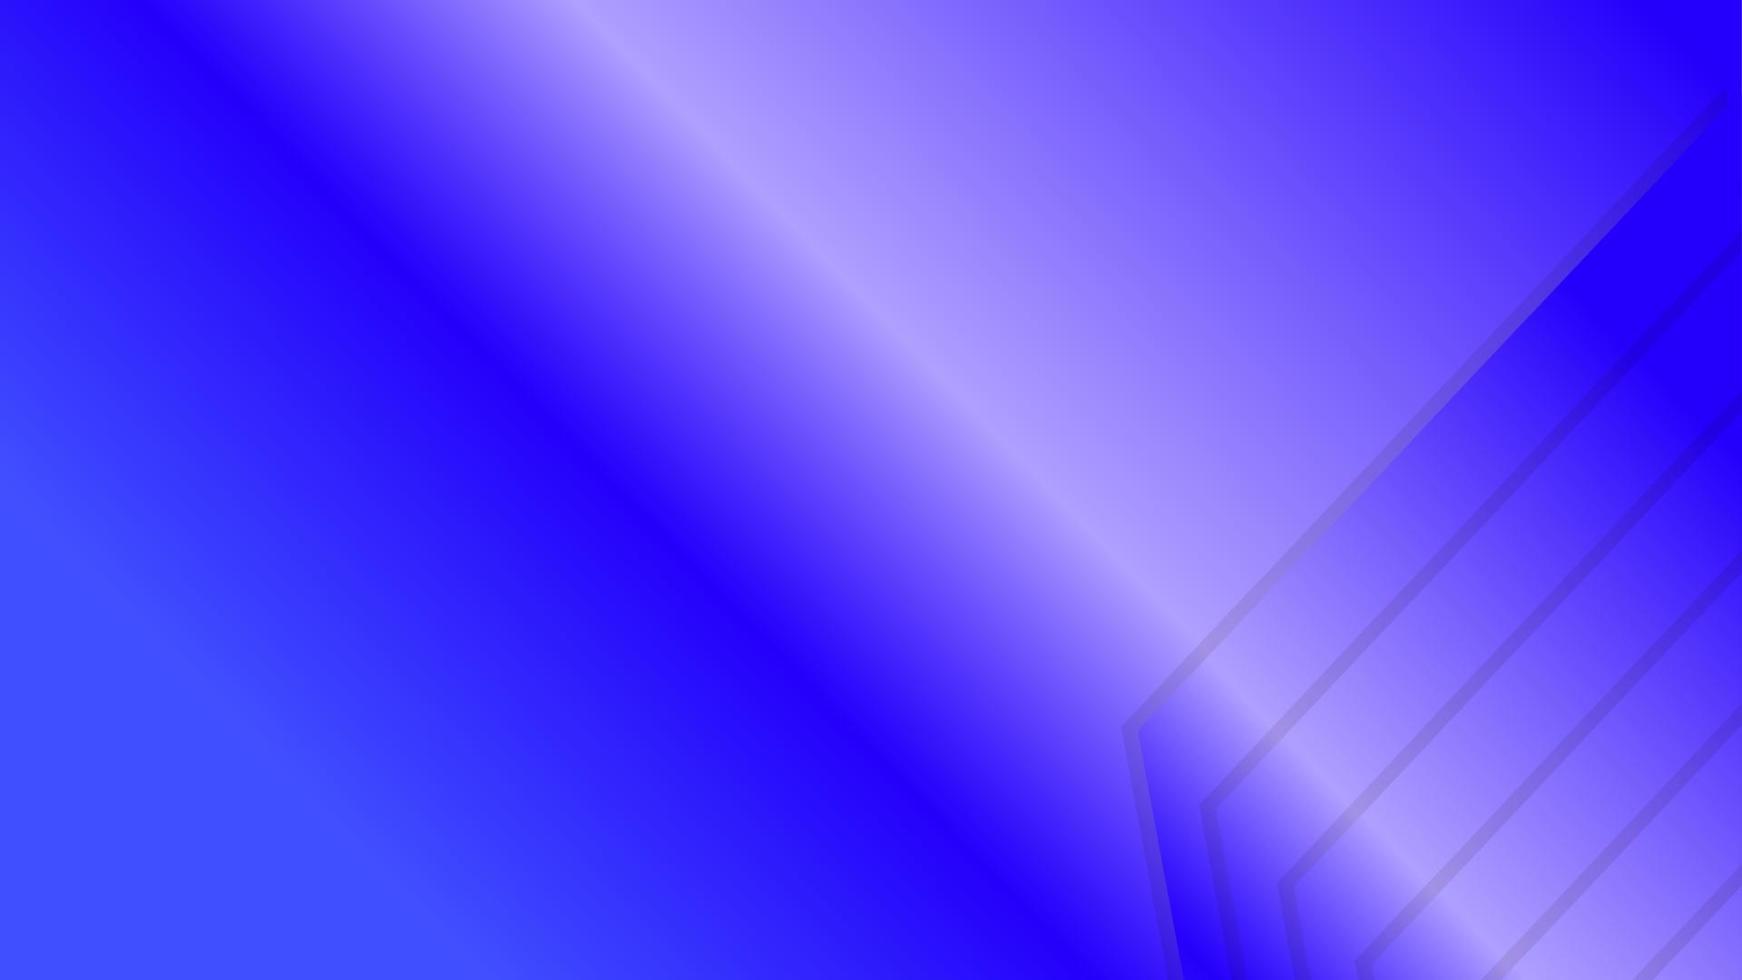 Blue vector Abstract, science, futuristic, energy technology concept. Digital image of light rays, stripes lines with blue light, speed and motion blur over dark blue background